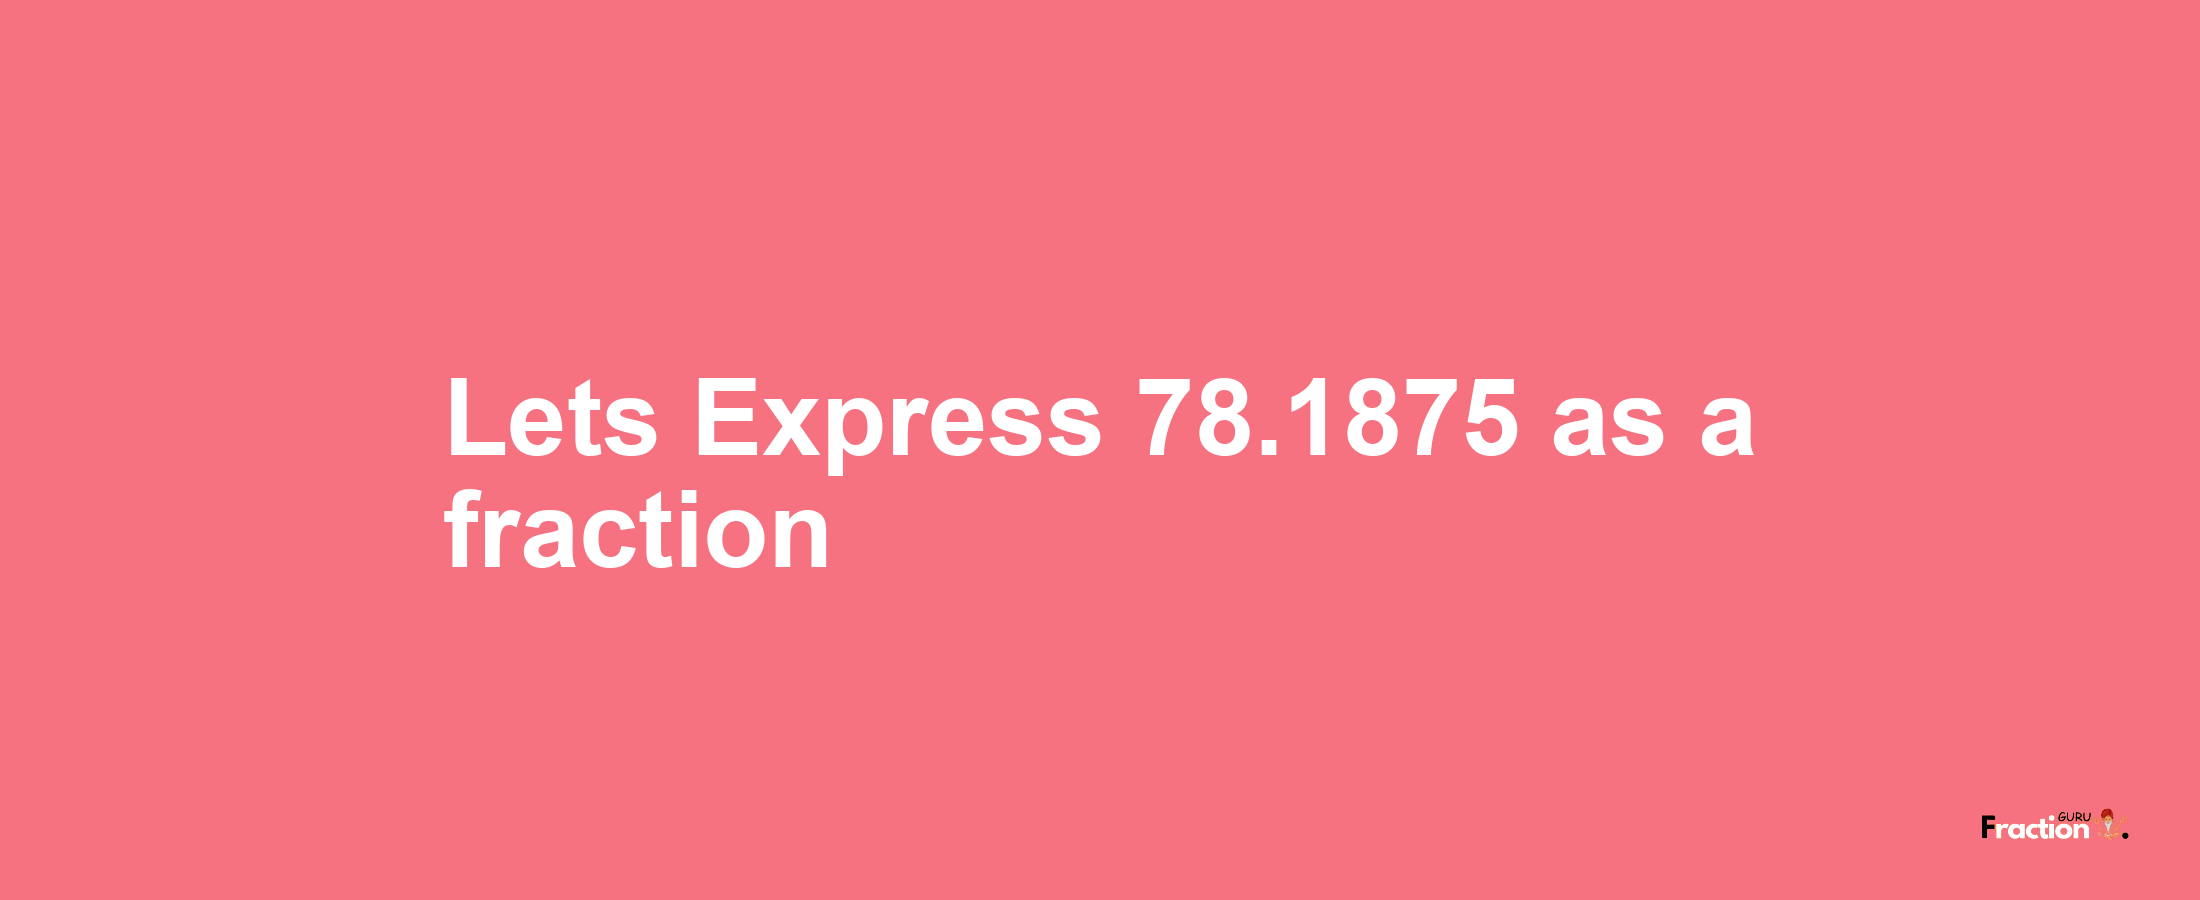 Lets Express 78.1875 as afraction